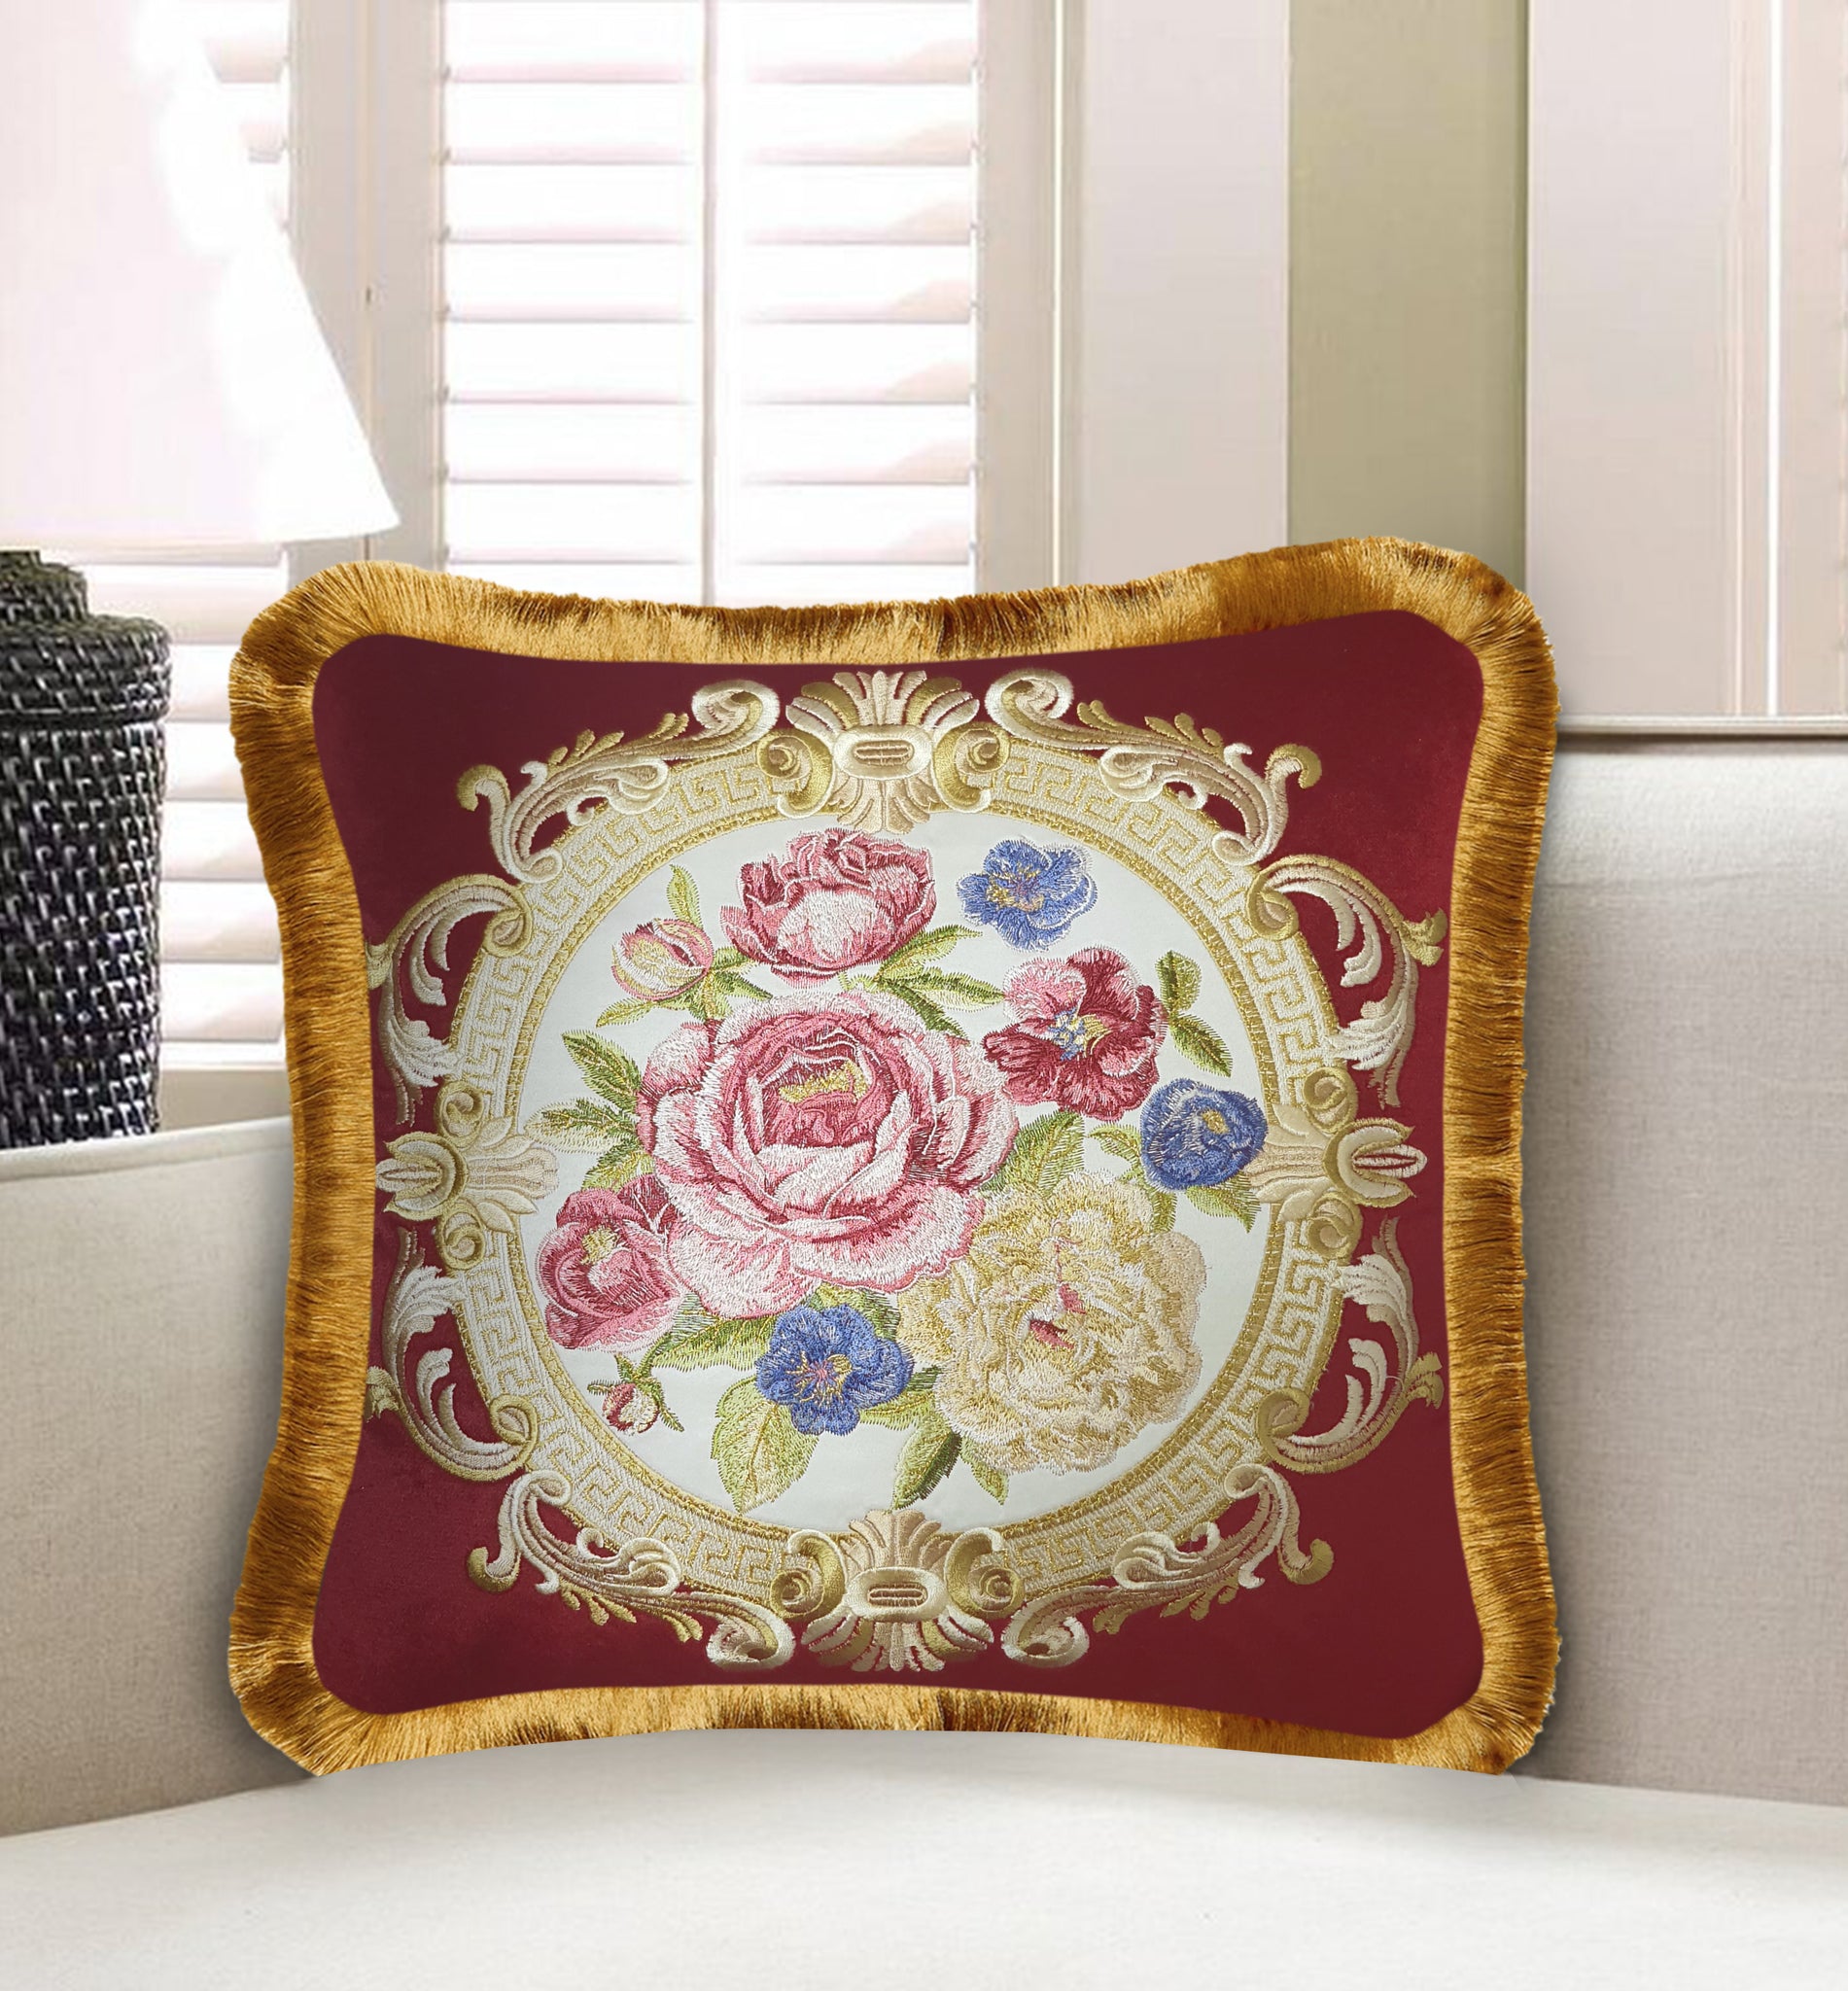 Velvet Cushion Cover Aubusson Rose Decorative Pillowcase Floral Bouquet Embroidery Throw Pillow for Sofa Chair Living Room 45x45 cm 18x18 In